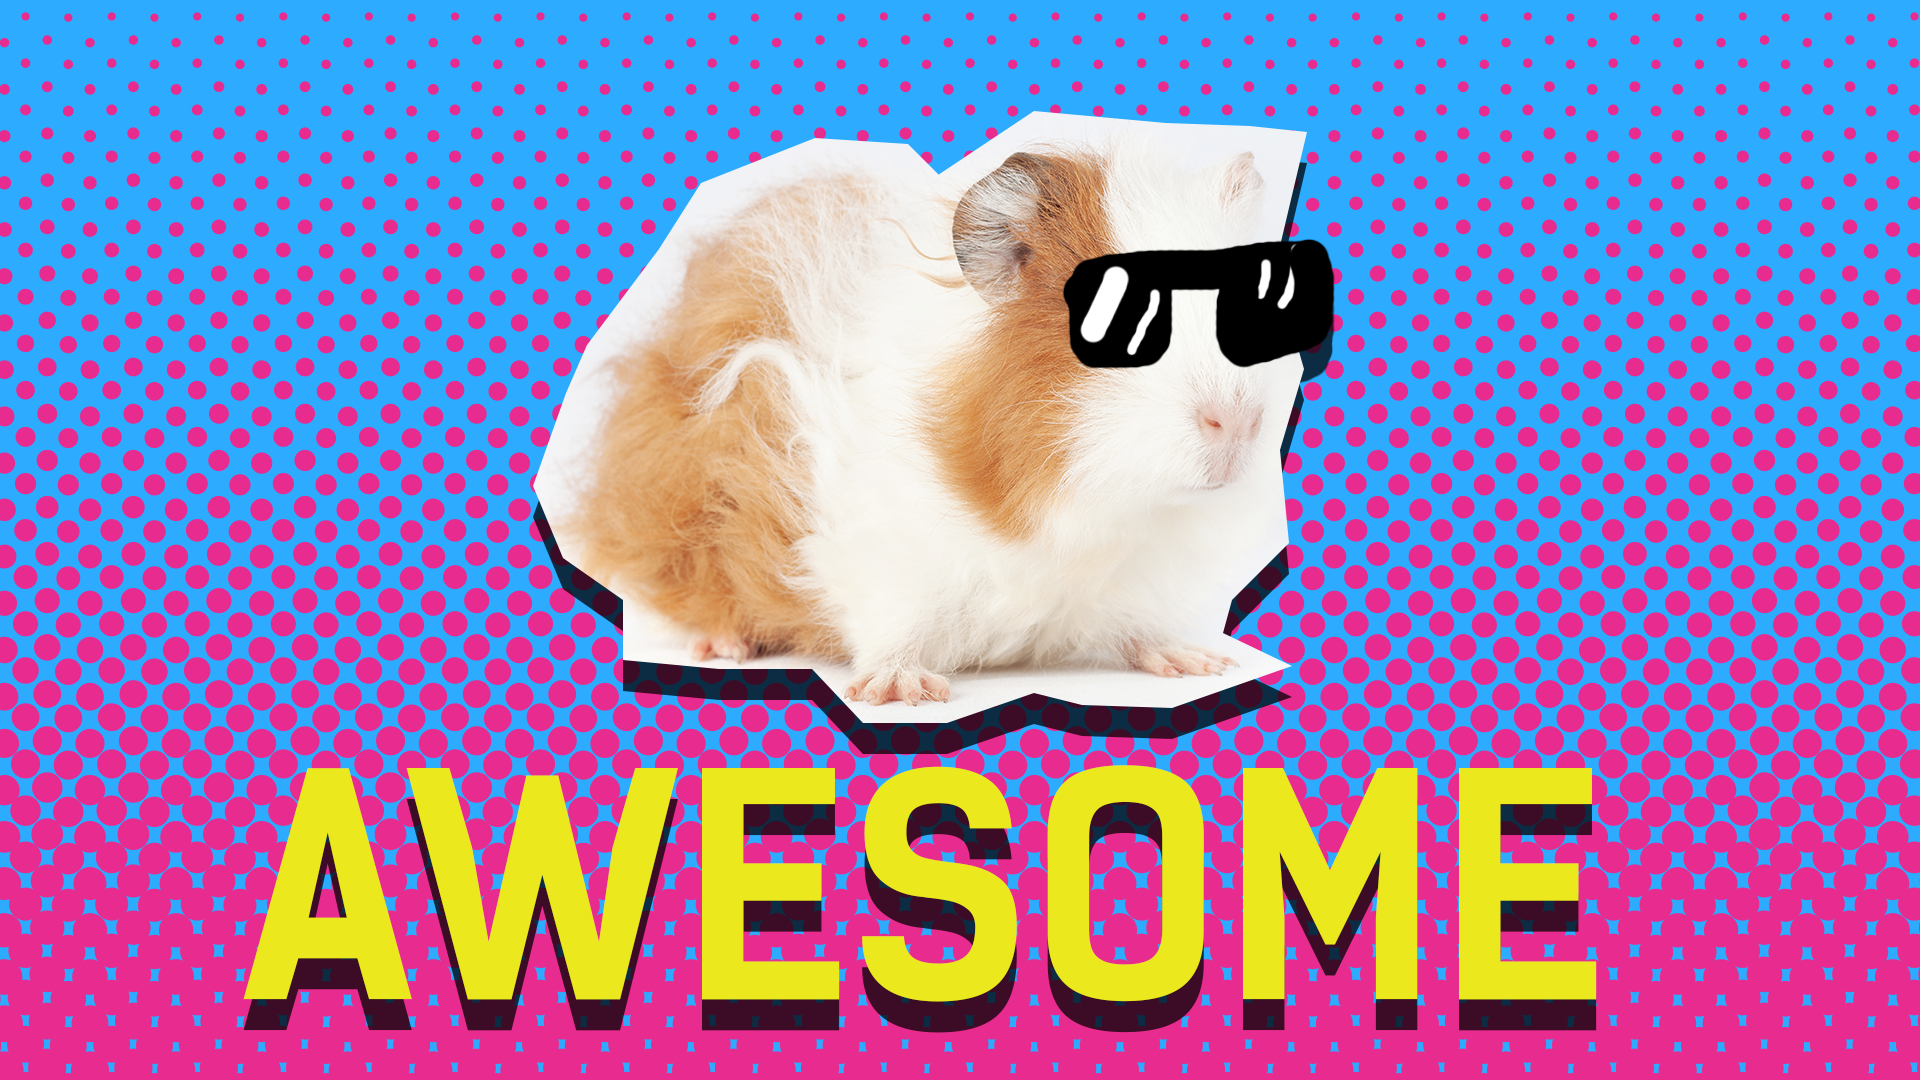 Guinea Pig and the word awesome on blue and pink background